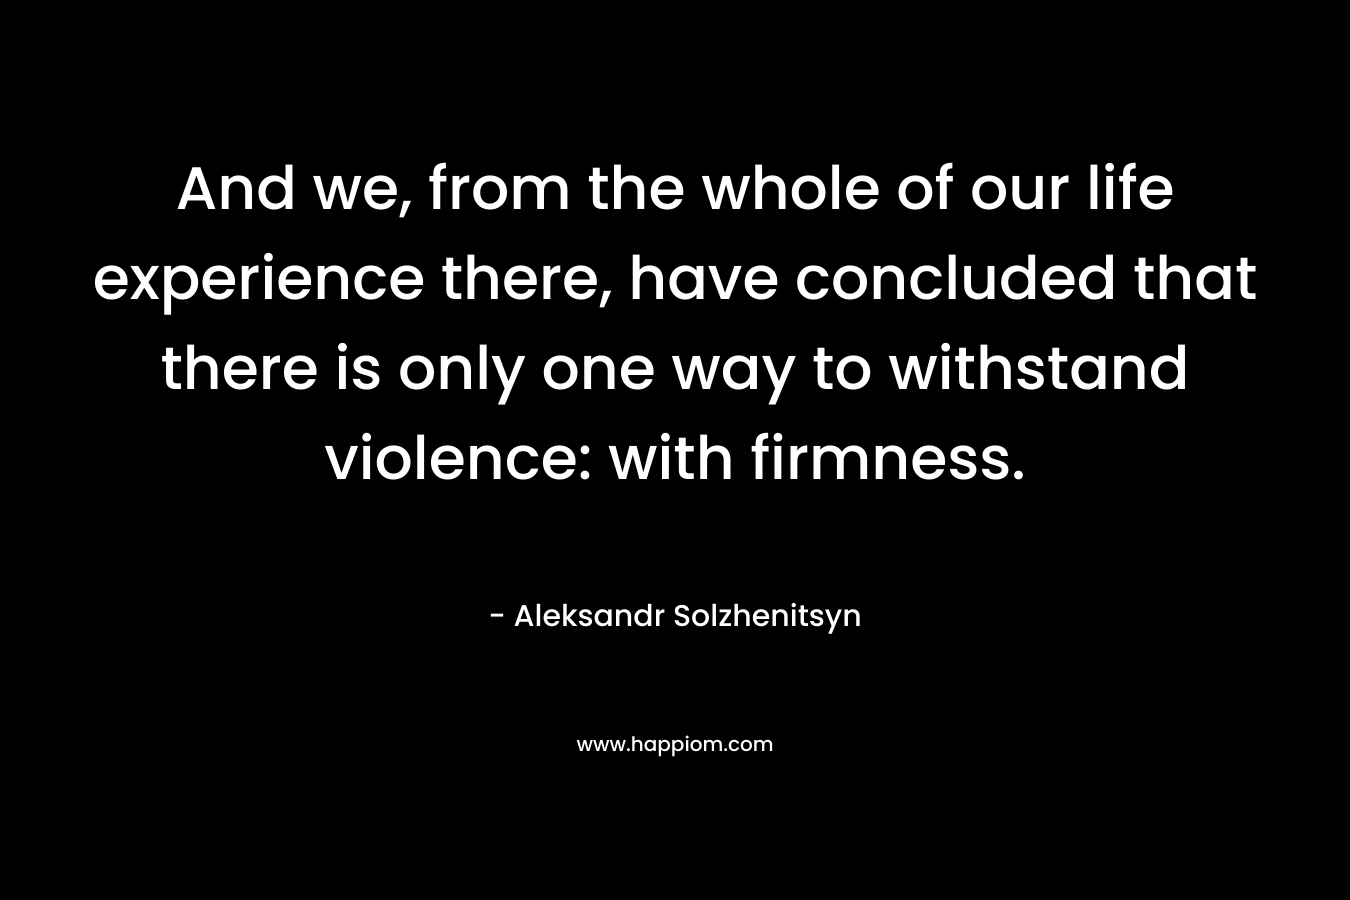 And we, from the whole of our life experience there, have concluded that there is only one way to withstand violence: with firmness. – Aleksandr Solzhenitsyn